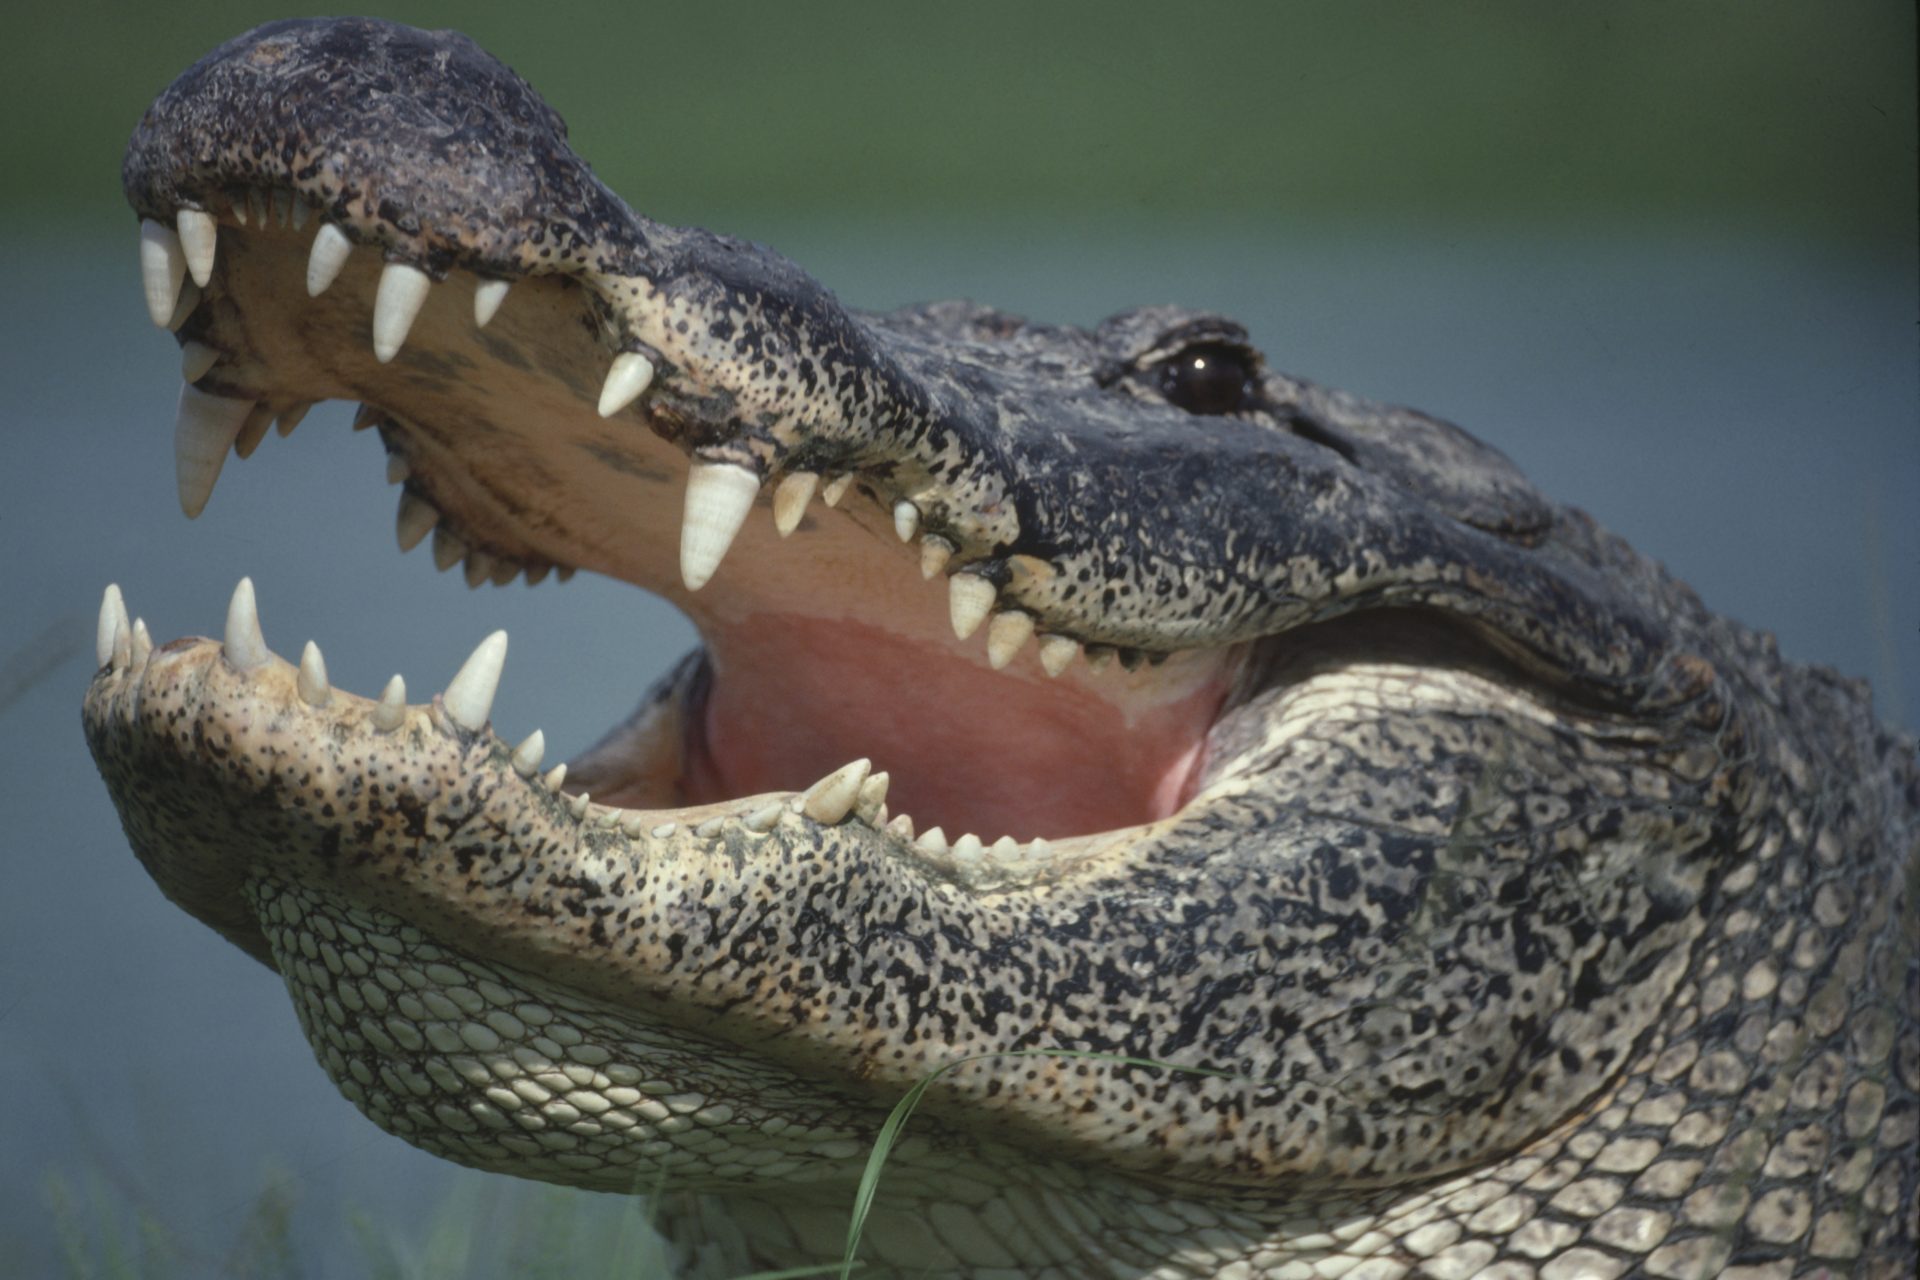 Scientists got an alligator to make sounds in a chamber full of helium 